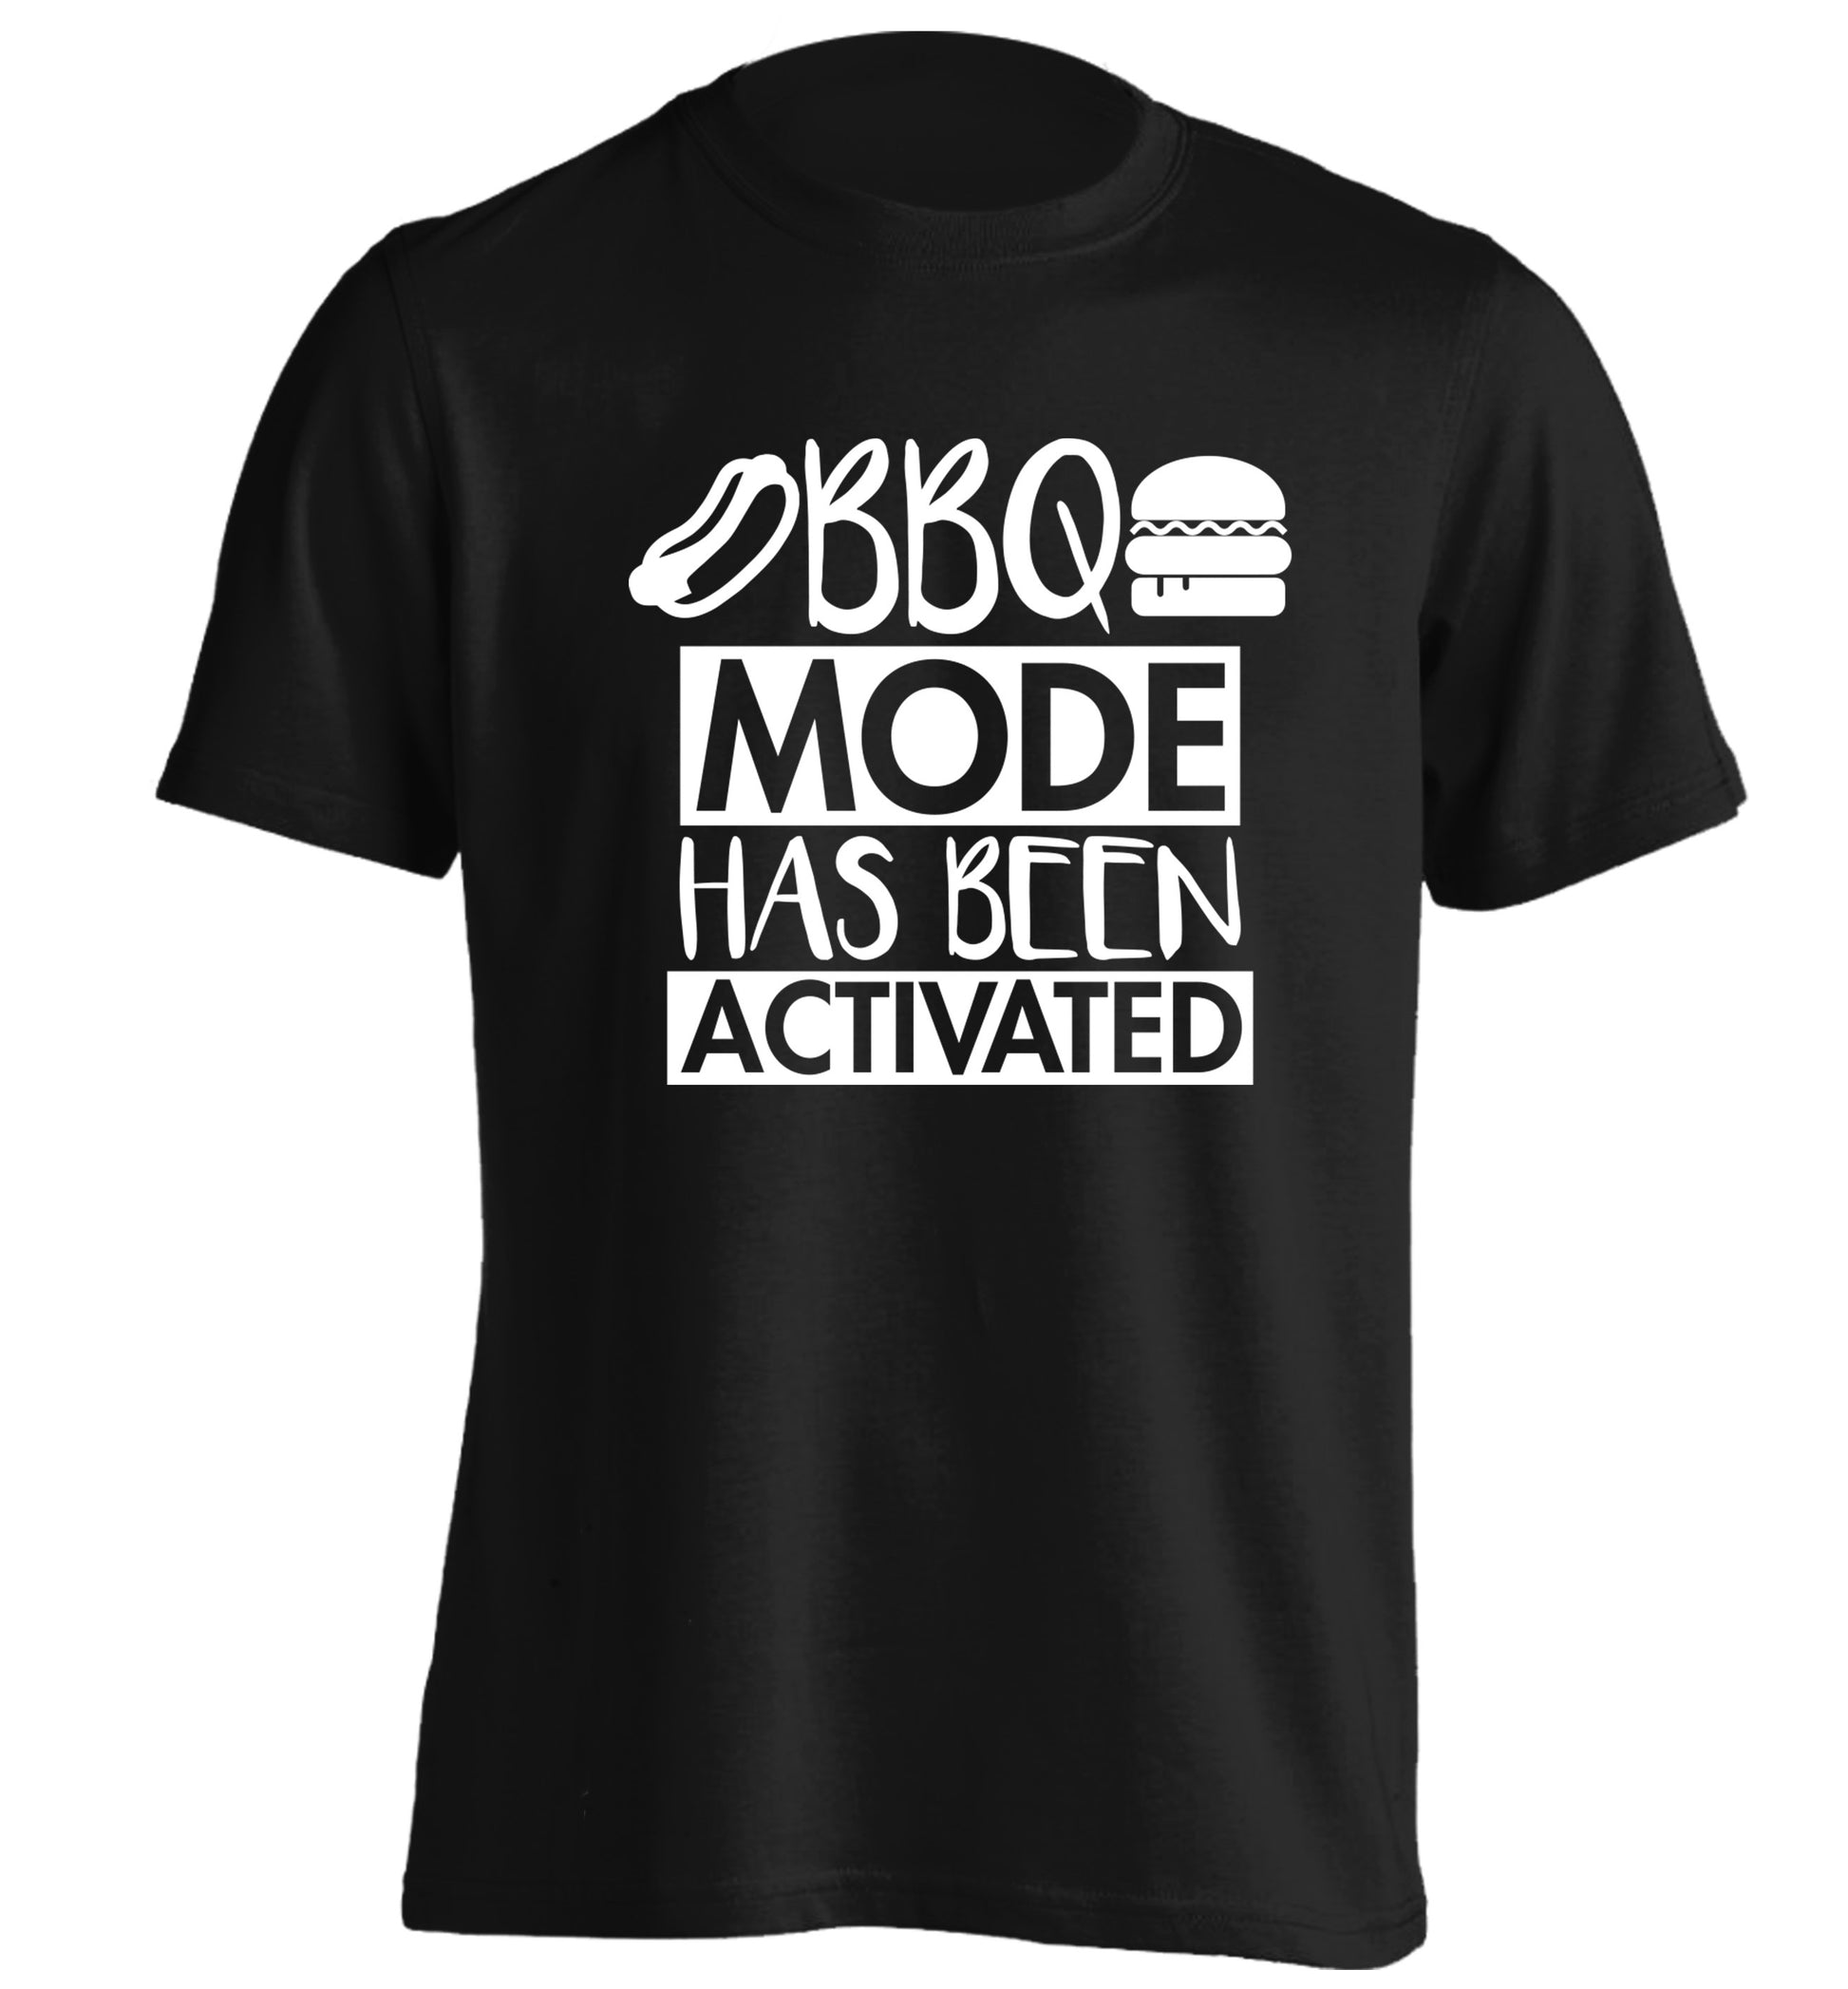 Bbq mode has been activated adults unisex black Tshirt 2XL